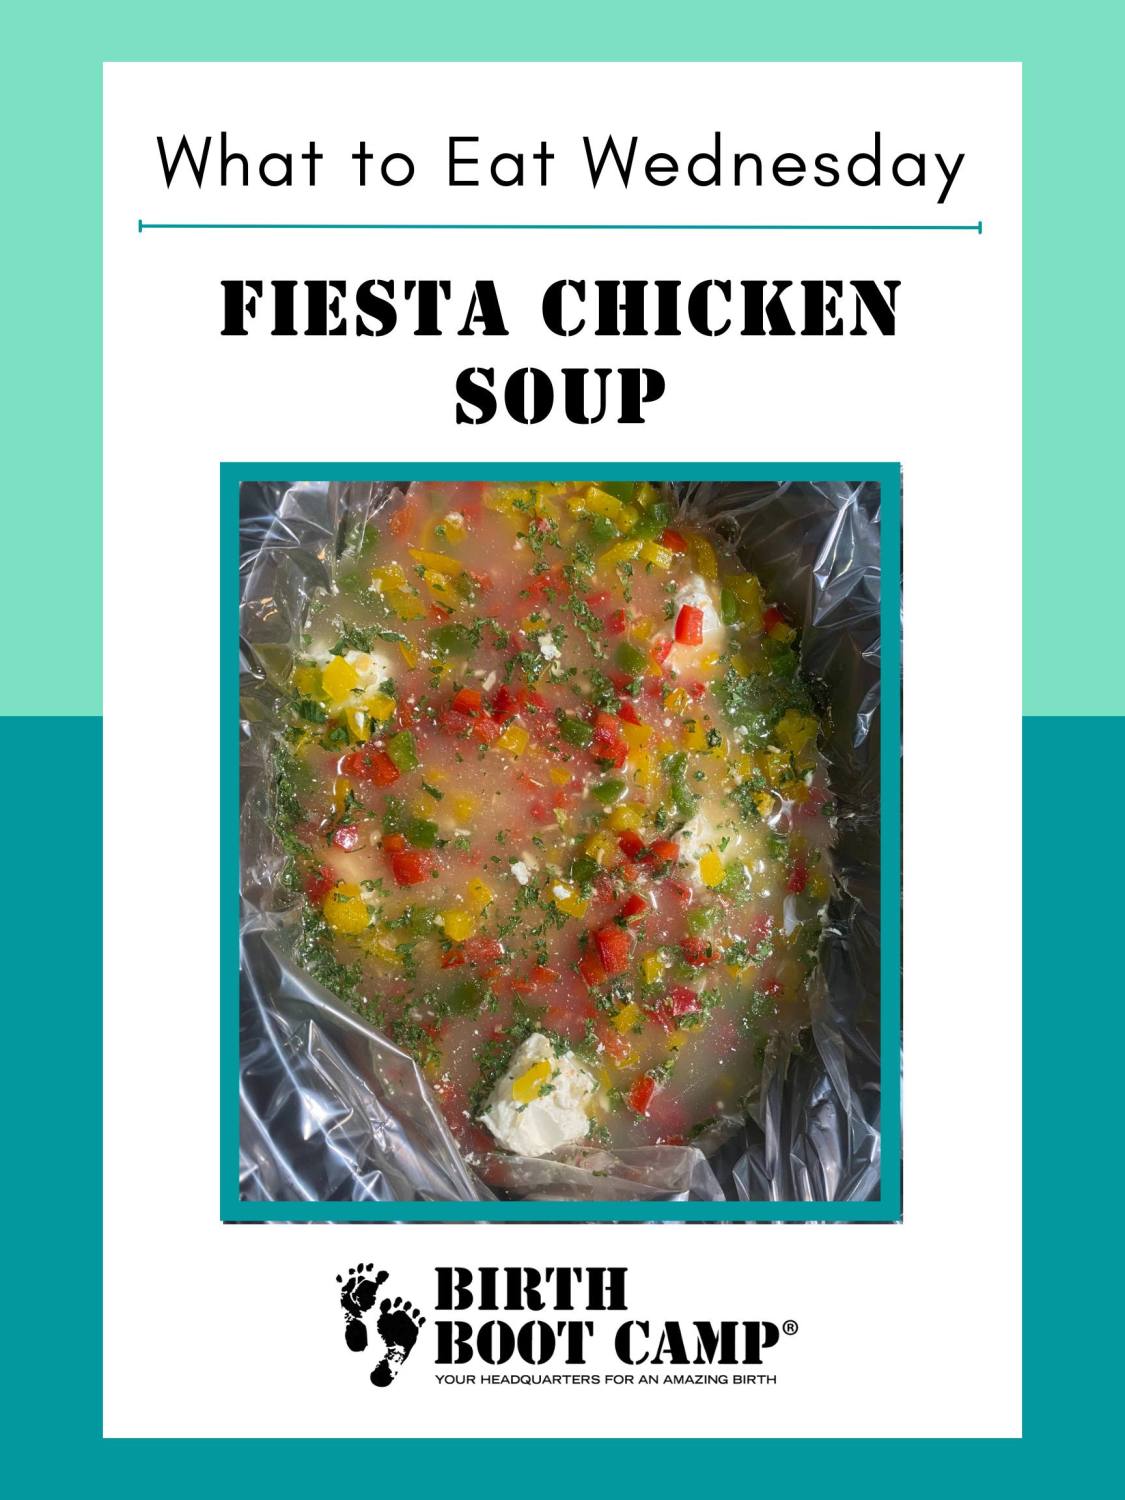 What to Eat Wednesday – Fiesta Chicken Soup Recipe